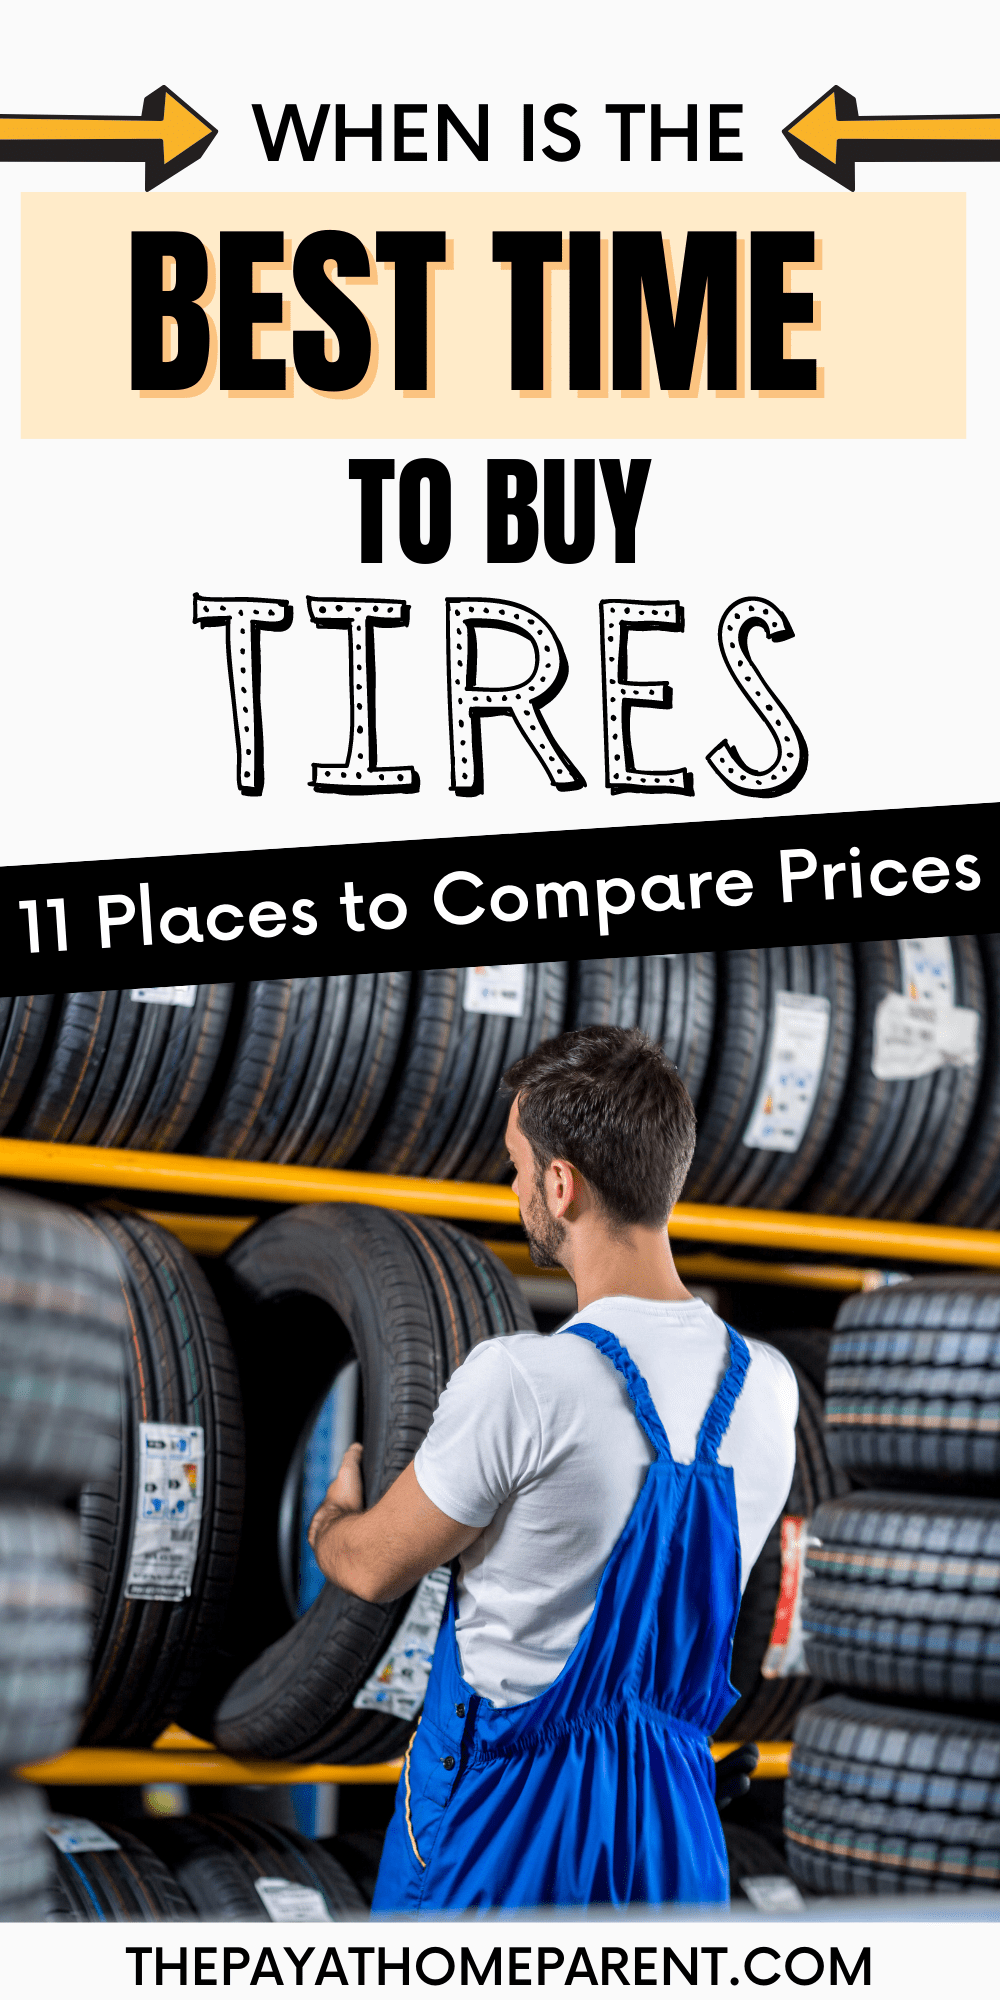 When Is the Best Time to Buy Tires? (Right Here, Right Now!)